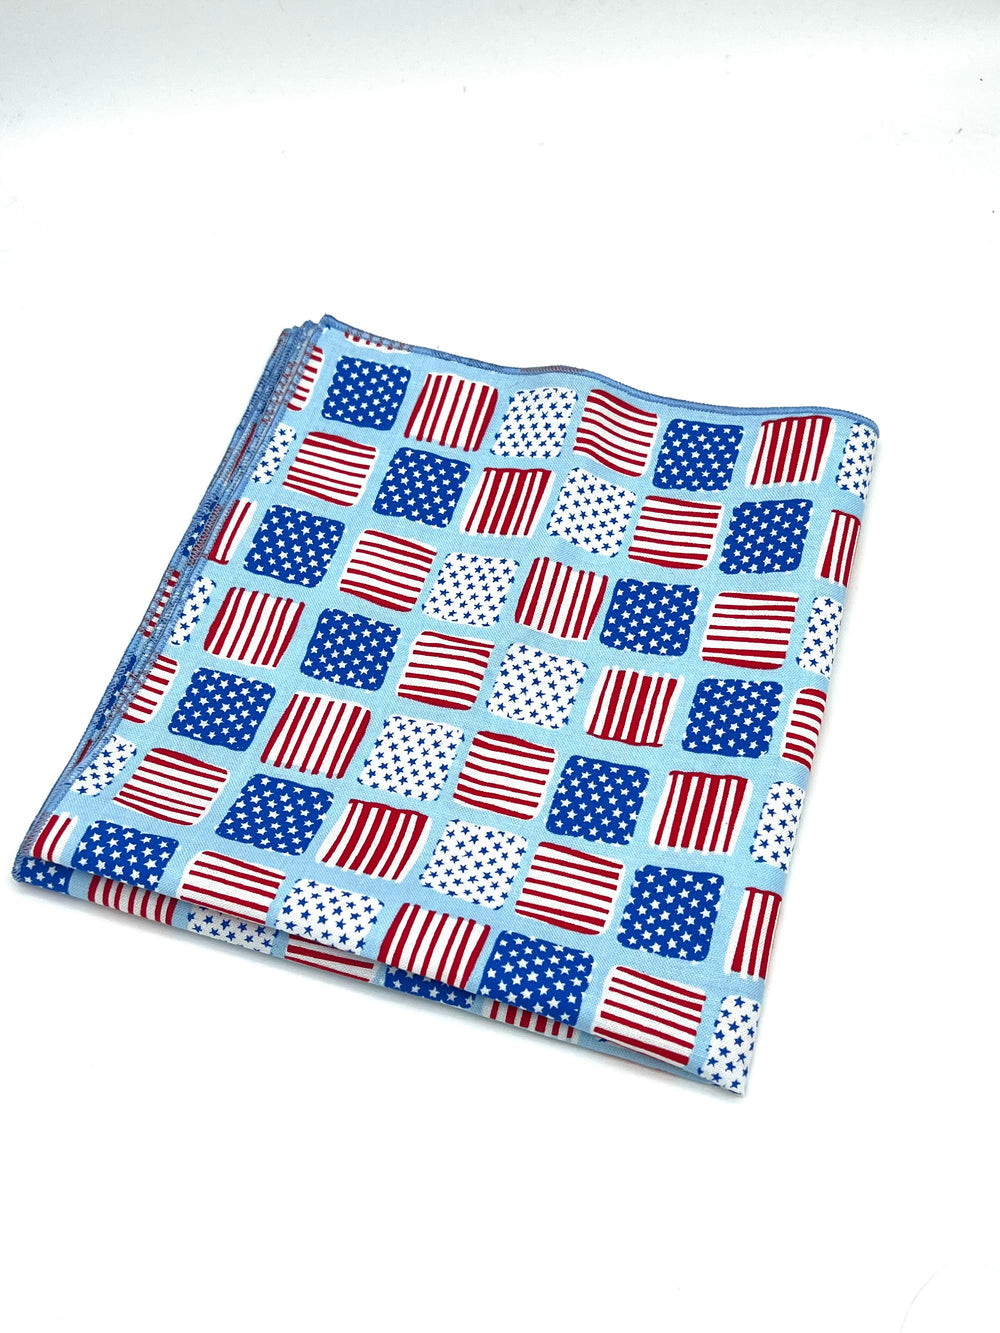 The Independence Handkerchief